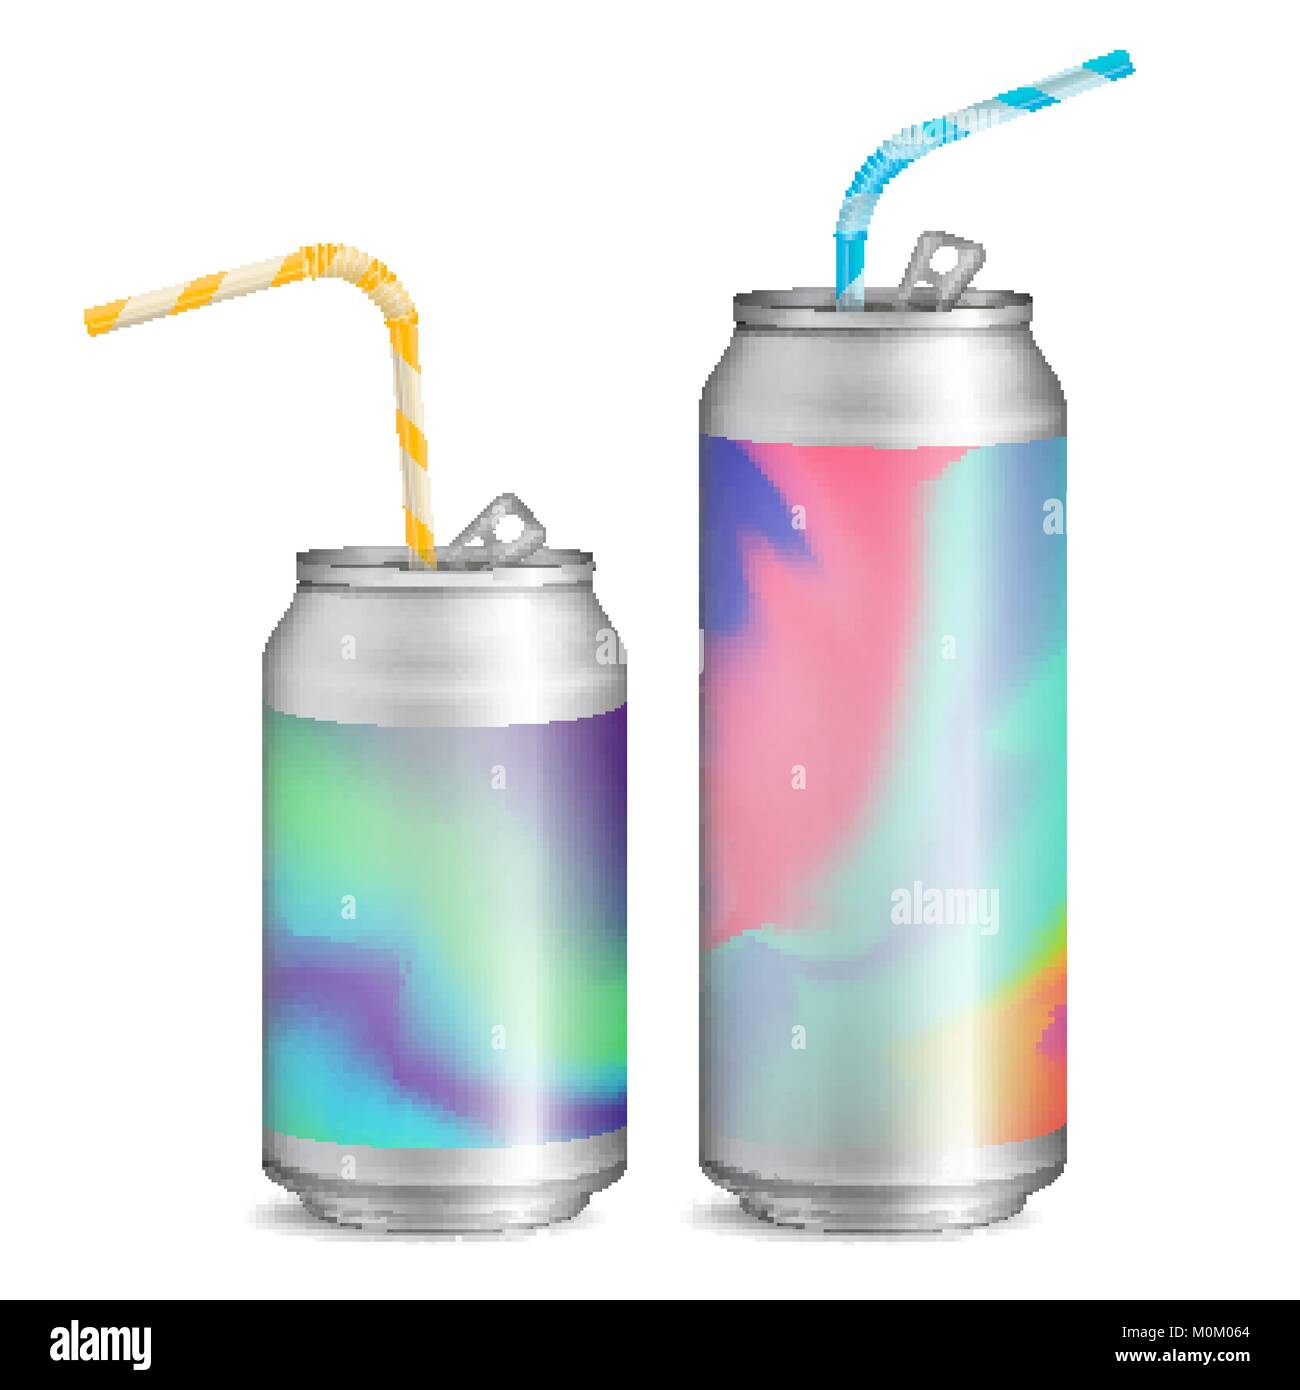 Download Realistic Metallic Cans Vector Soft Drink 3d Blank Aluminium Cans Colorful Drinking Straws Different Types Good For Branding Design 500 300 Ml Isolated Illustration Stock Vector Image Art Alamy